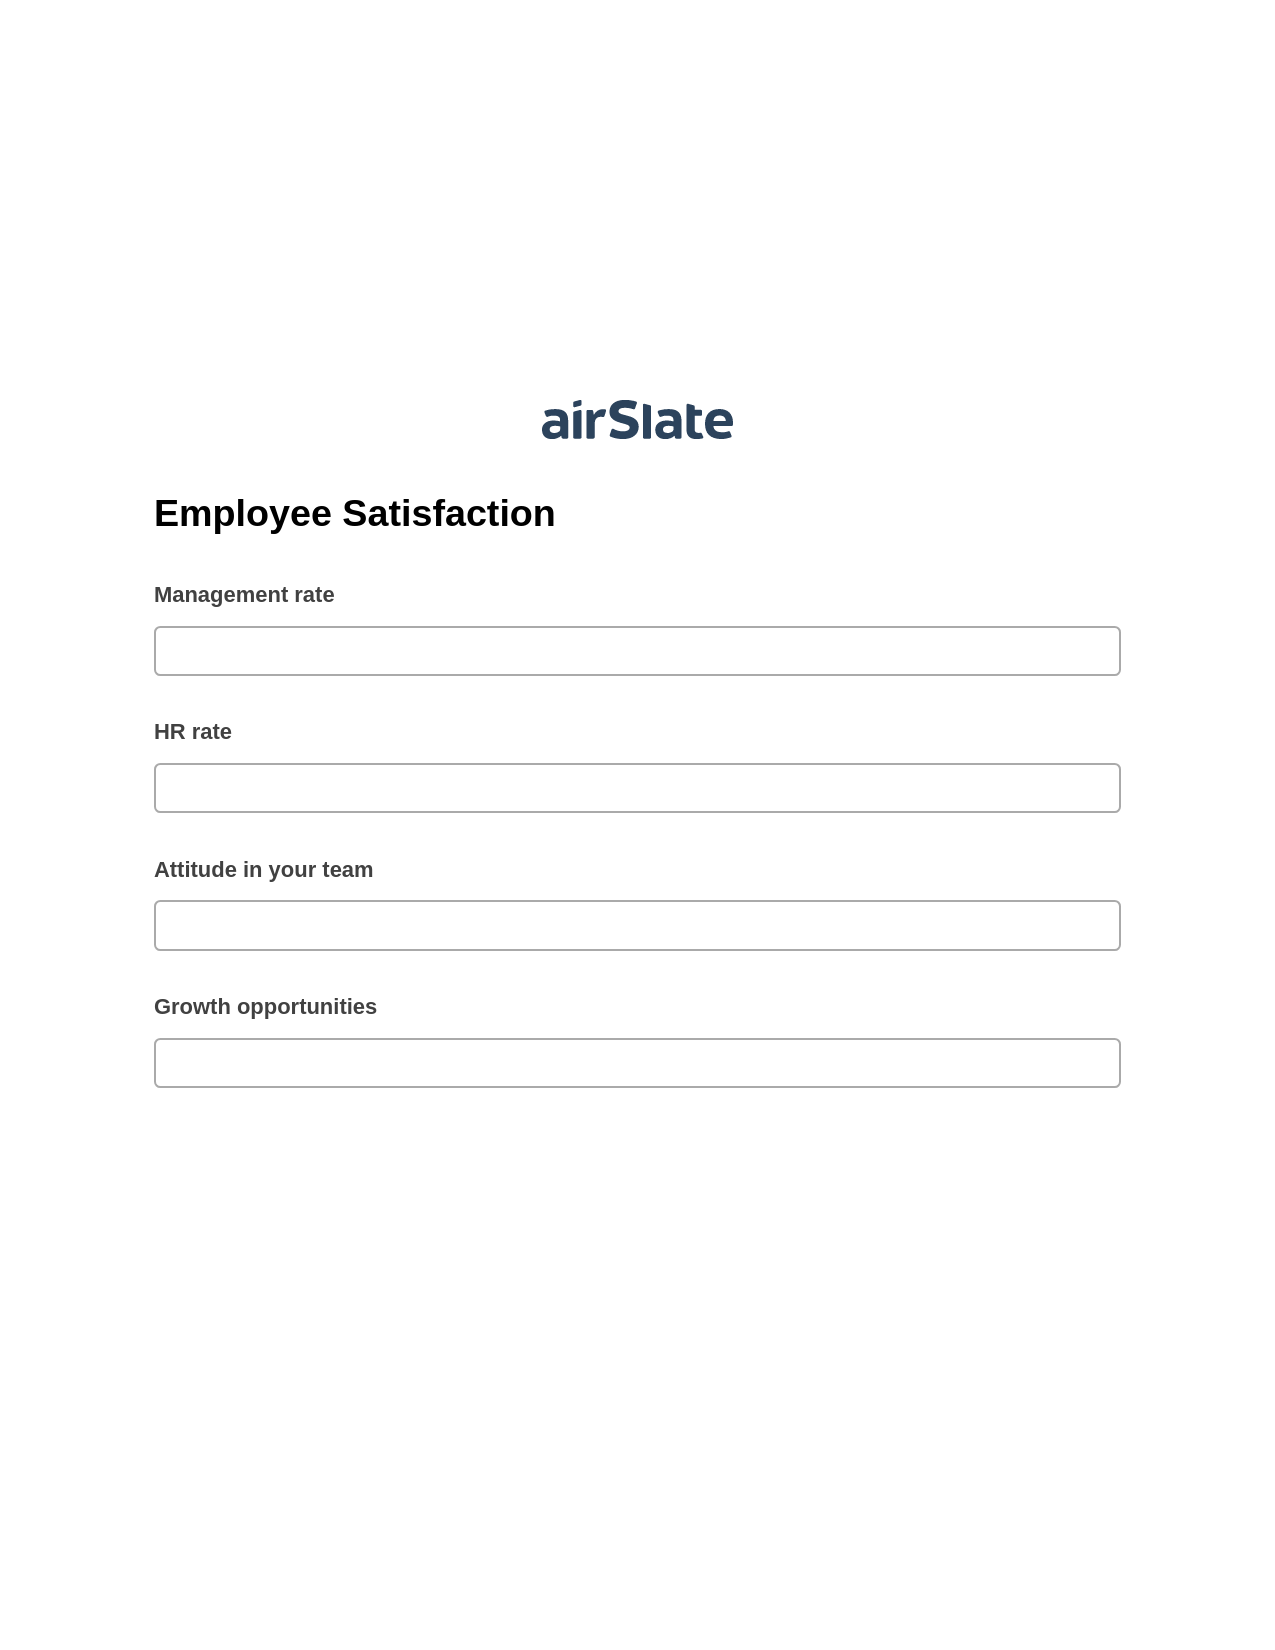 Employee Satisfaction Pre-fill Dropdowns from Google Sheet Bot, Unassign Role Bot, Archive to SharePoint Folder Bot